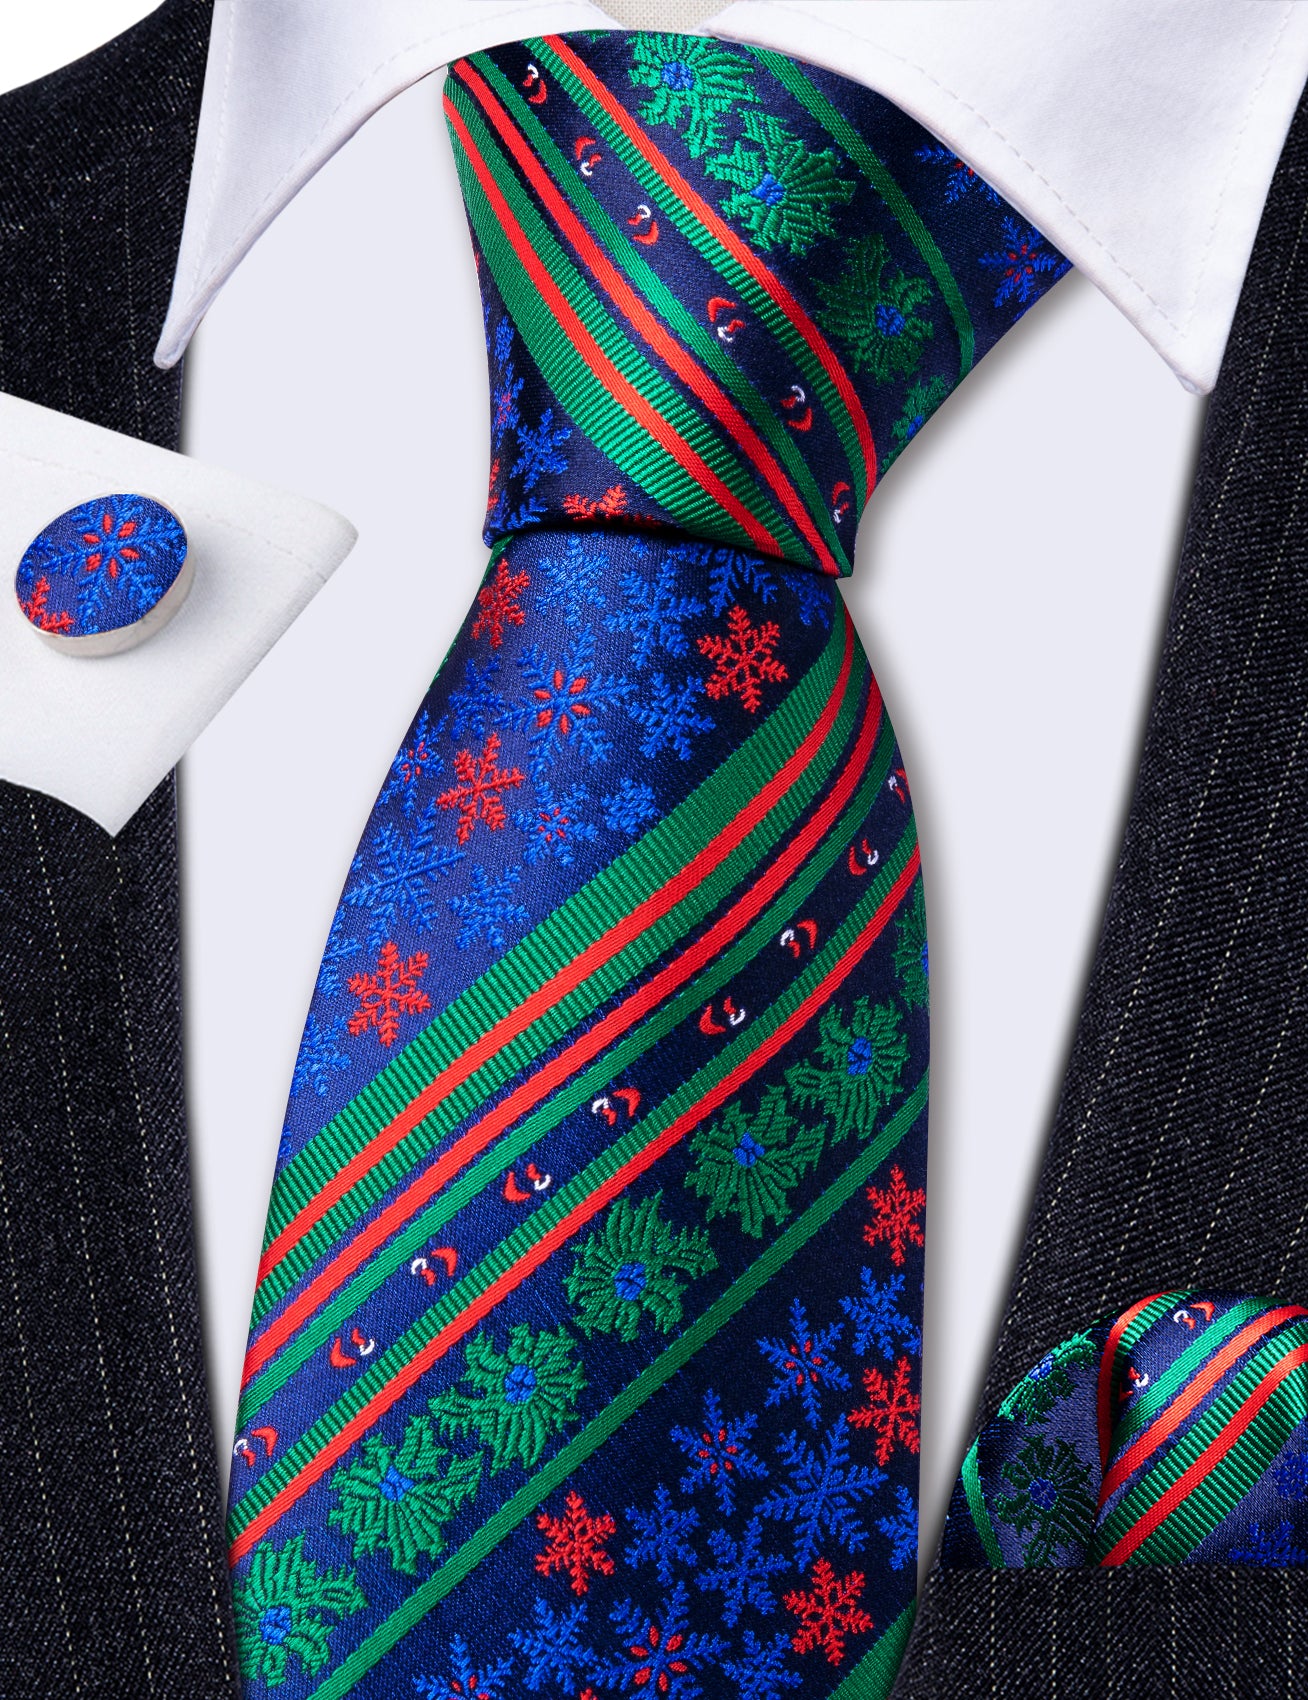 Barry Wang Christmas Striped Blue Green Floral Men's Tie Pocket Square Cufflinks Set